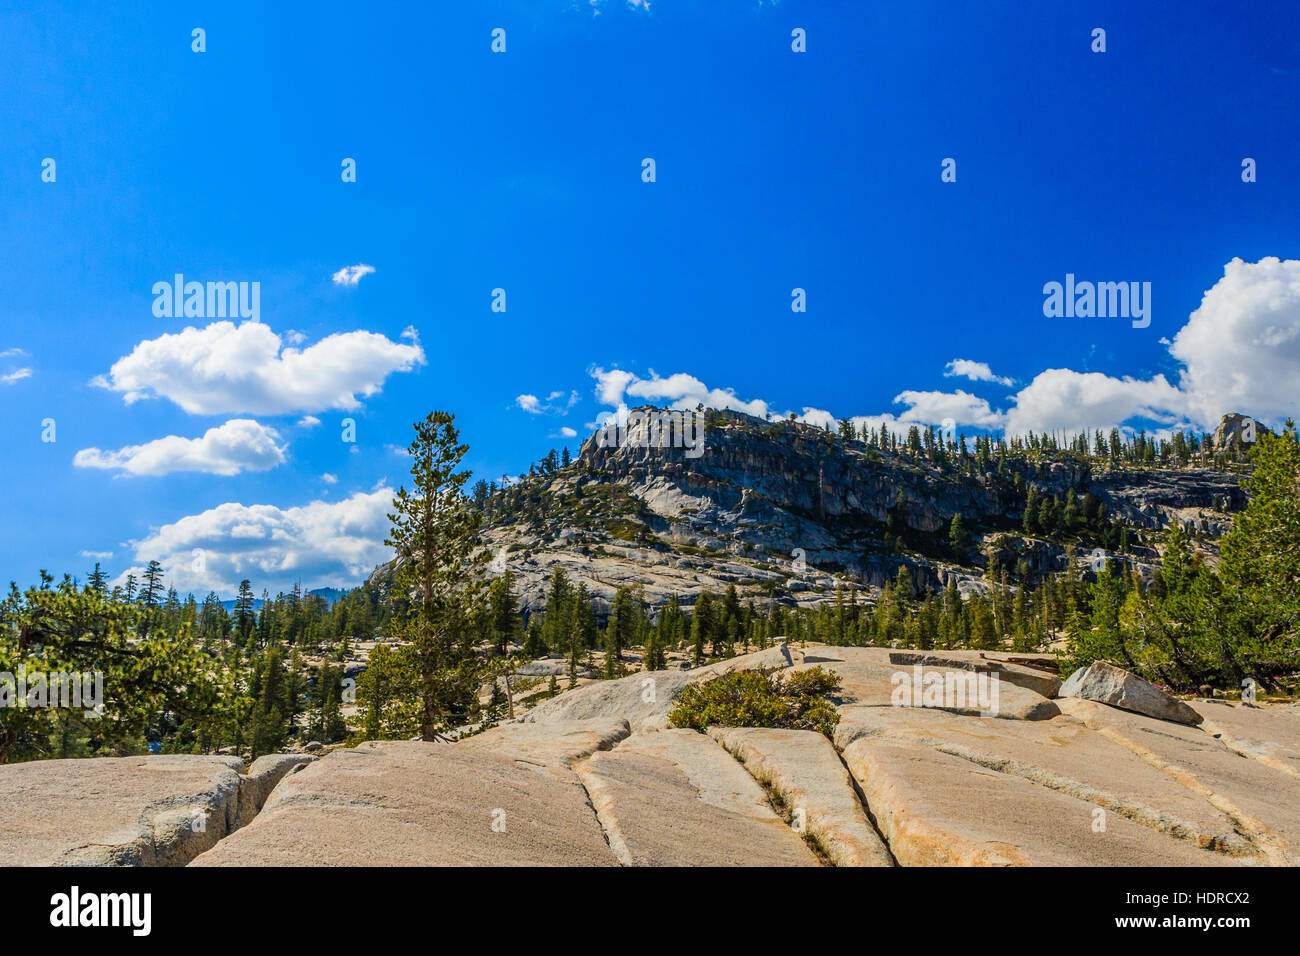 Tioga Pass is a mountain pass in the Sierra Nevada mountains. State Route 120 runs through it, and serves as the eastern entry point for Yosemite Nati Stock Photo